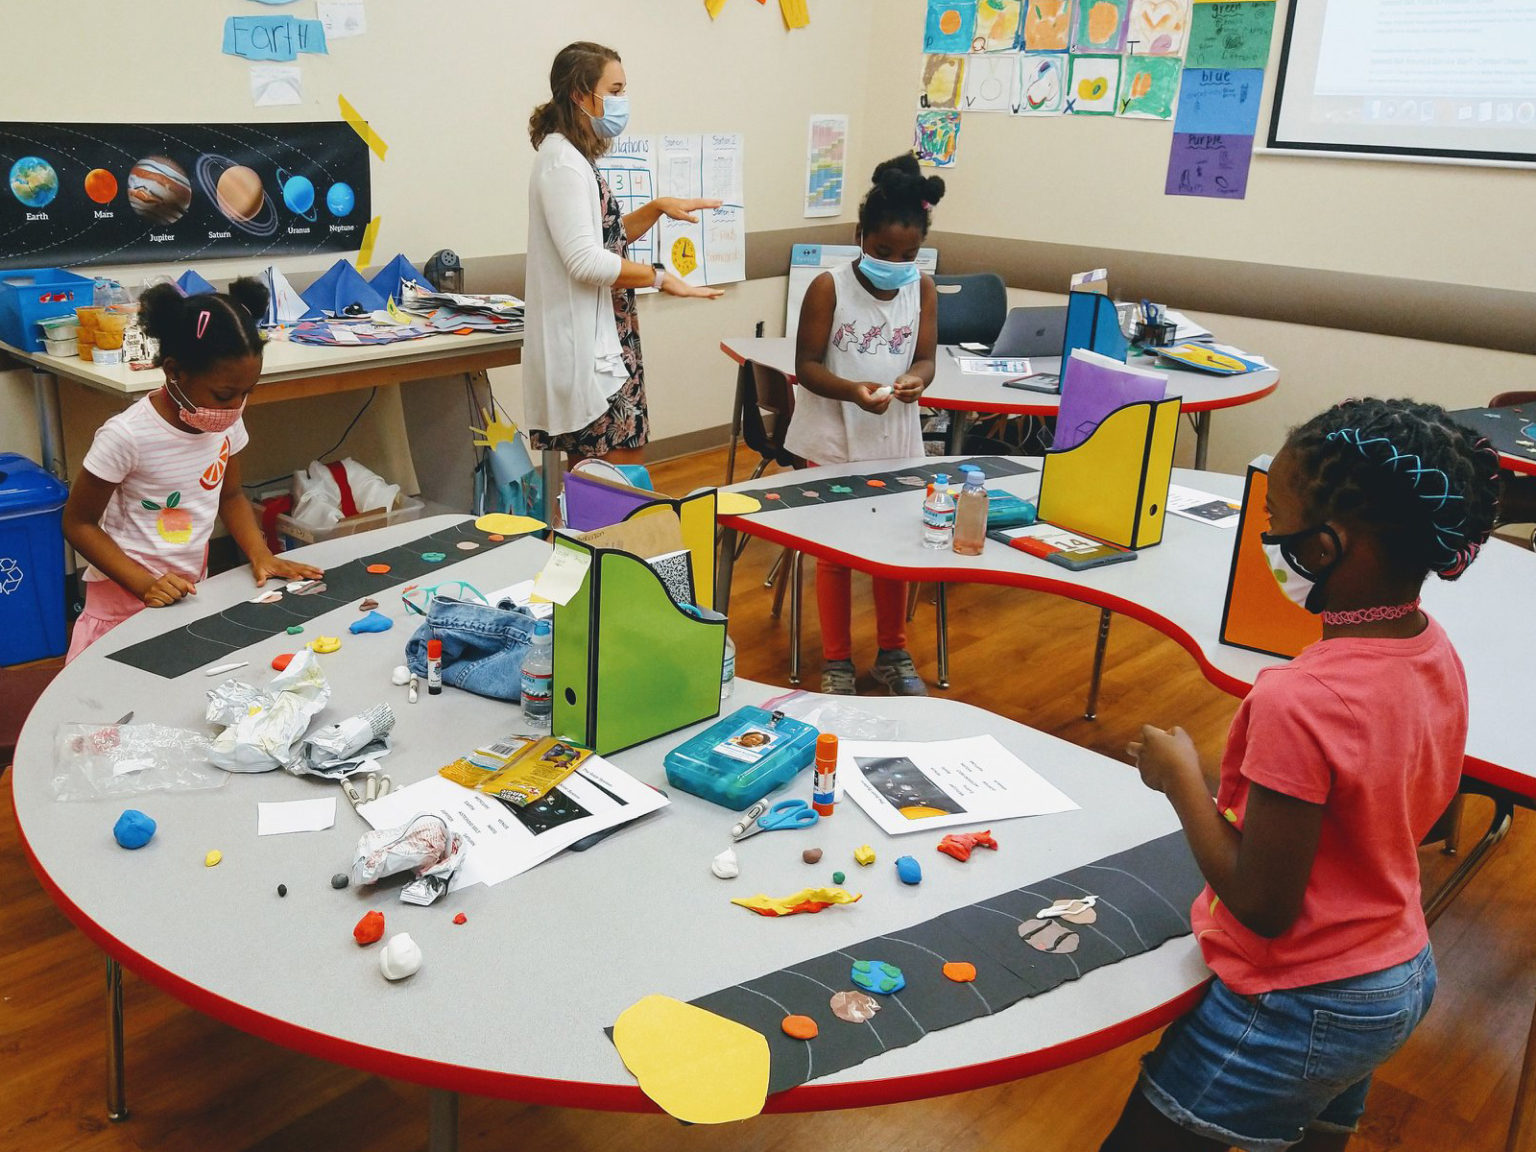 The Center for Creative Education in Palm Beach County, Florida, was one of the recipients of grant money.